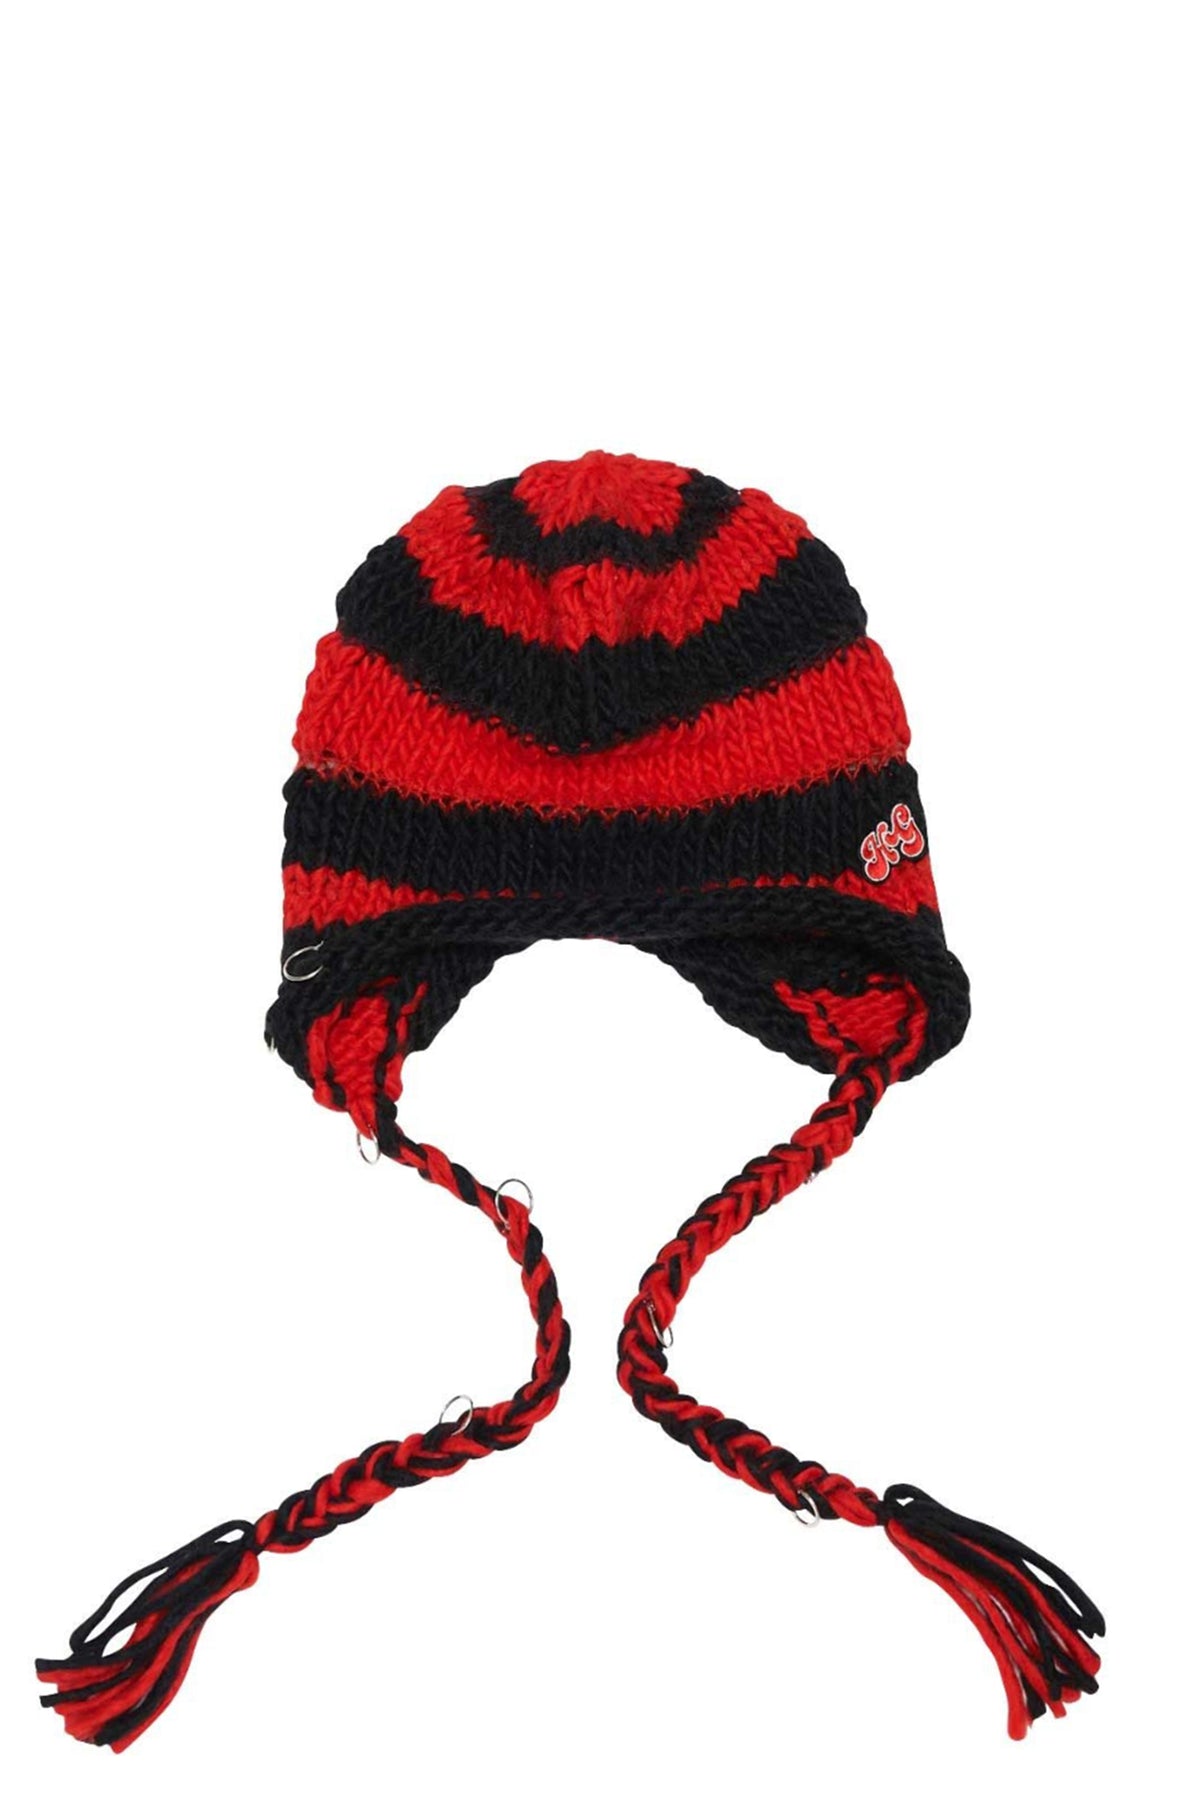 HYSTERIC GLAMOUR MOTOR CITY BABY HANDMADE KNITCAP / RED/BLK